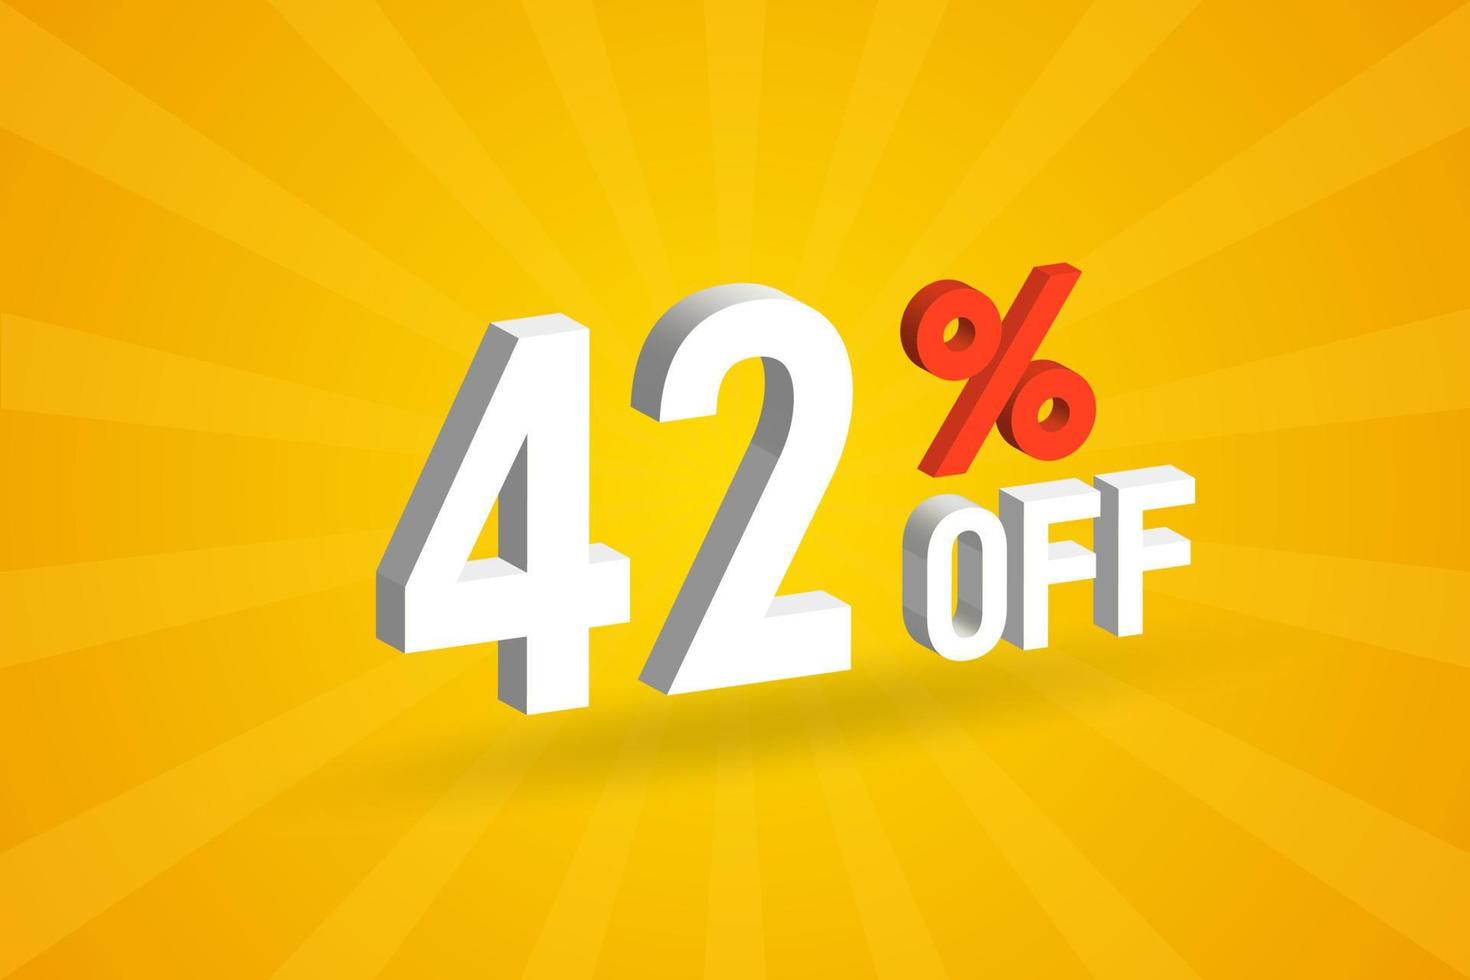 42 Percent off 3D Special promotional campaign design. 42 off 3D Discount Offer for Sale and marketing. vector